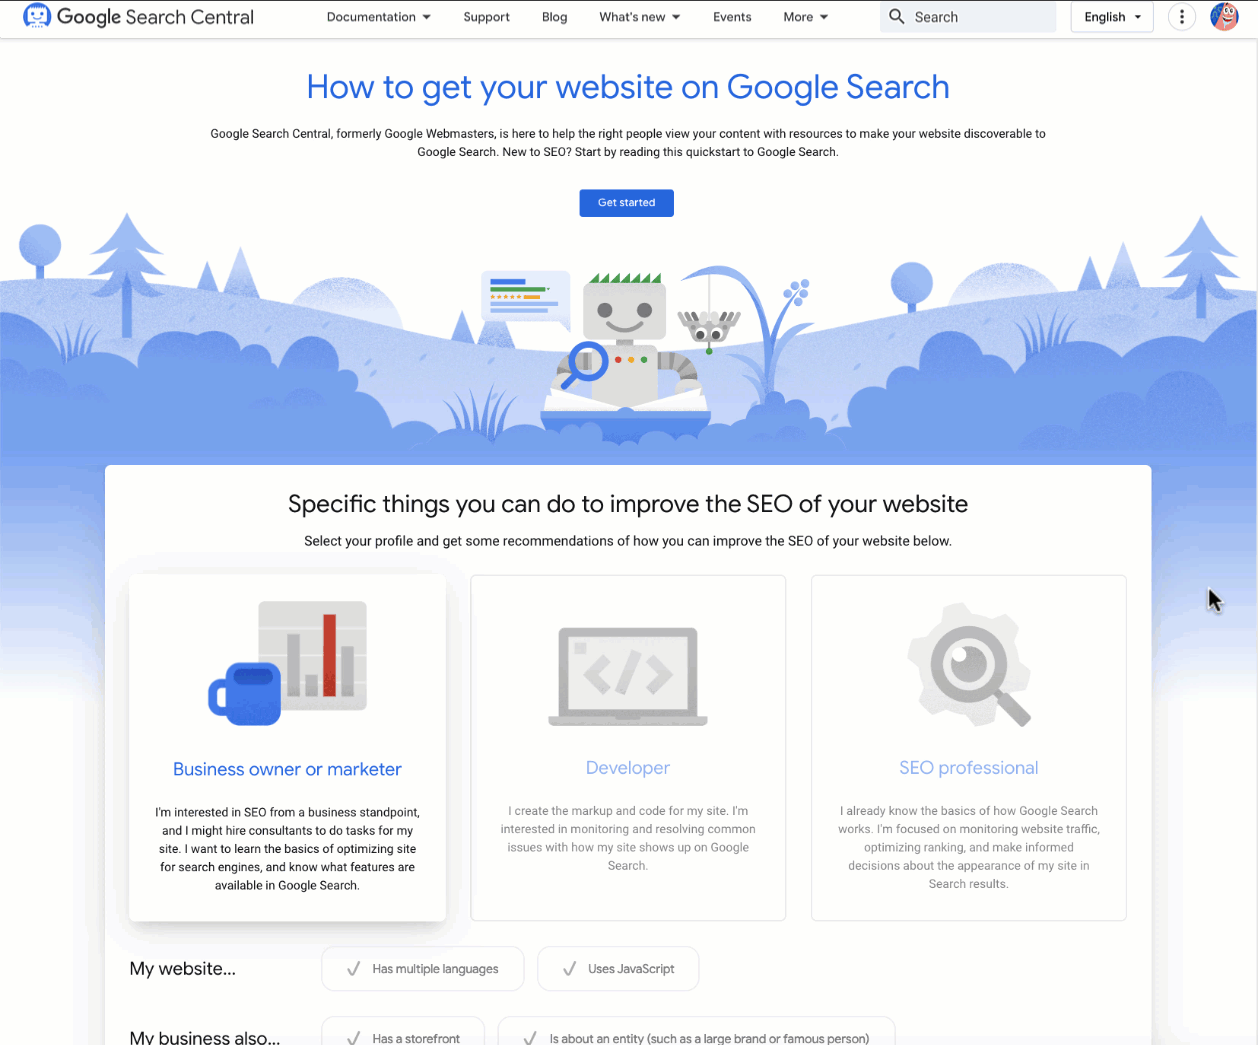 Interactive checklist on the Google Search Central landing page